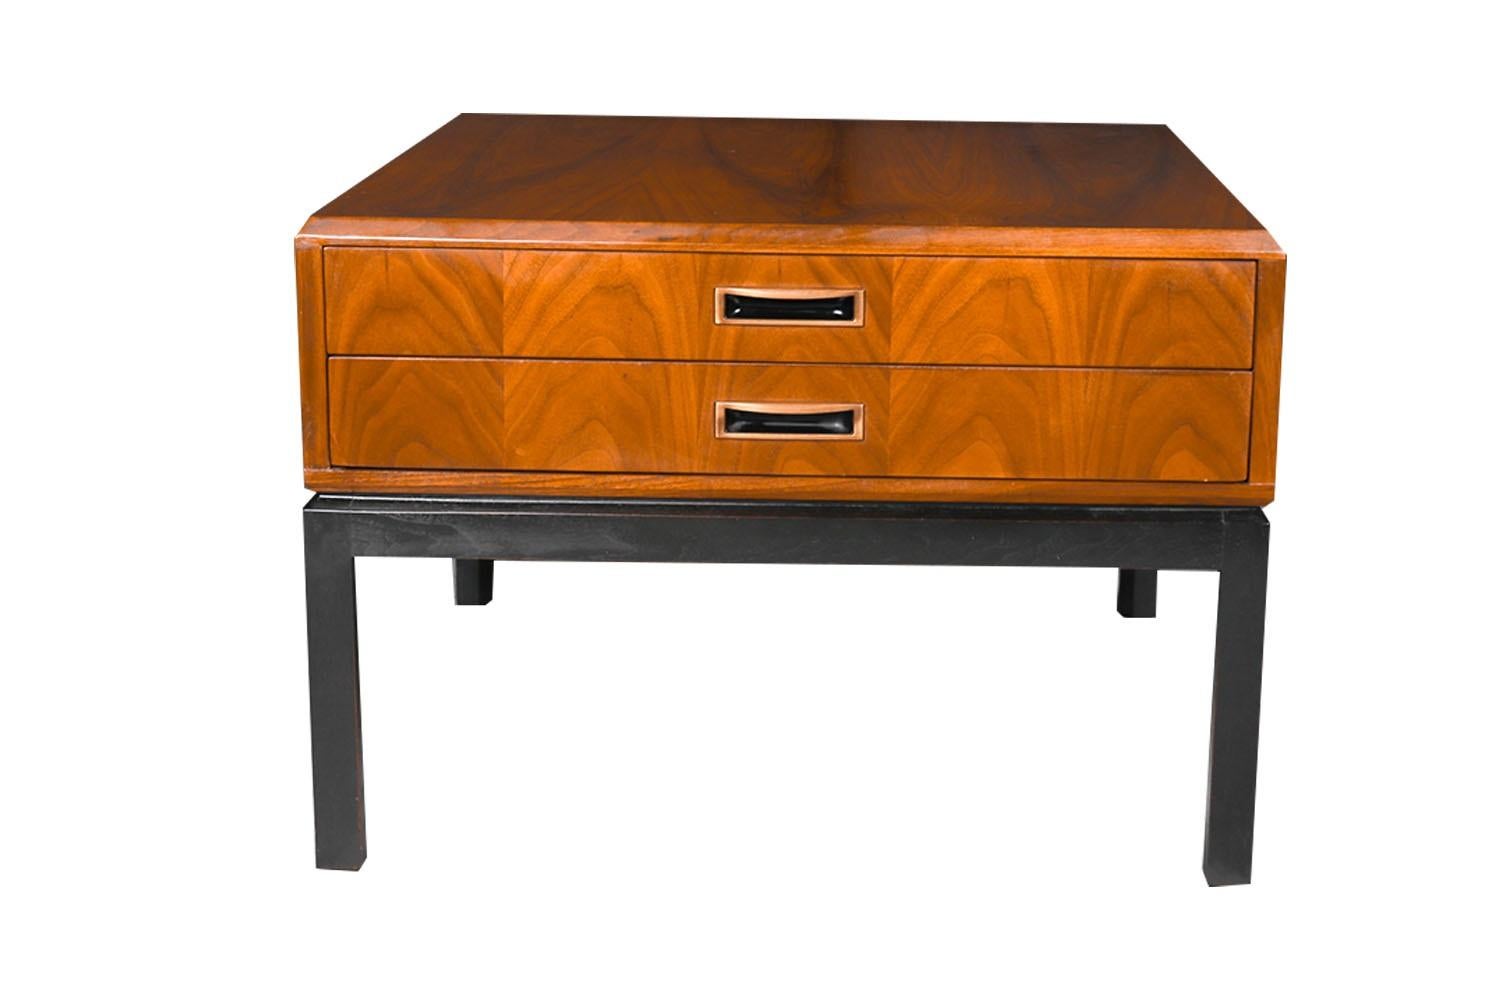 An exceptional Campaign style Mid-Century Modern, large side/ end table in the style of Jack Cartwright for Founders, circa 19th century. This absolute jewel remains in nearly pristine condition. The lines are clean and elegant. Features rich warm